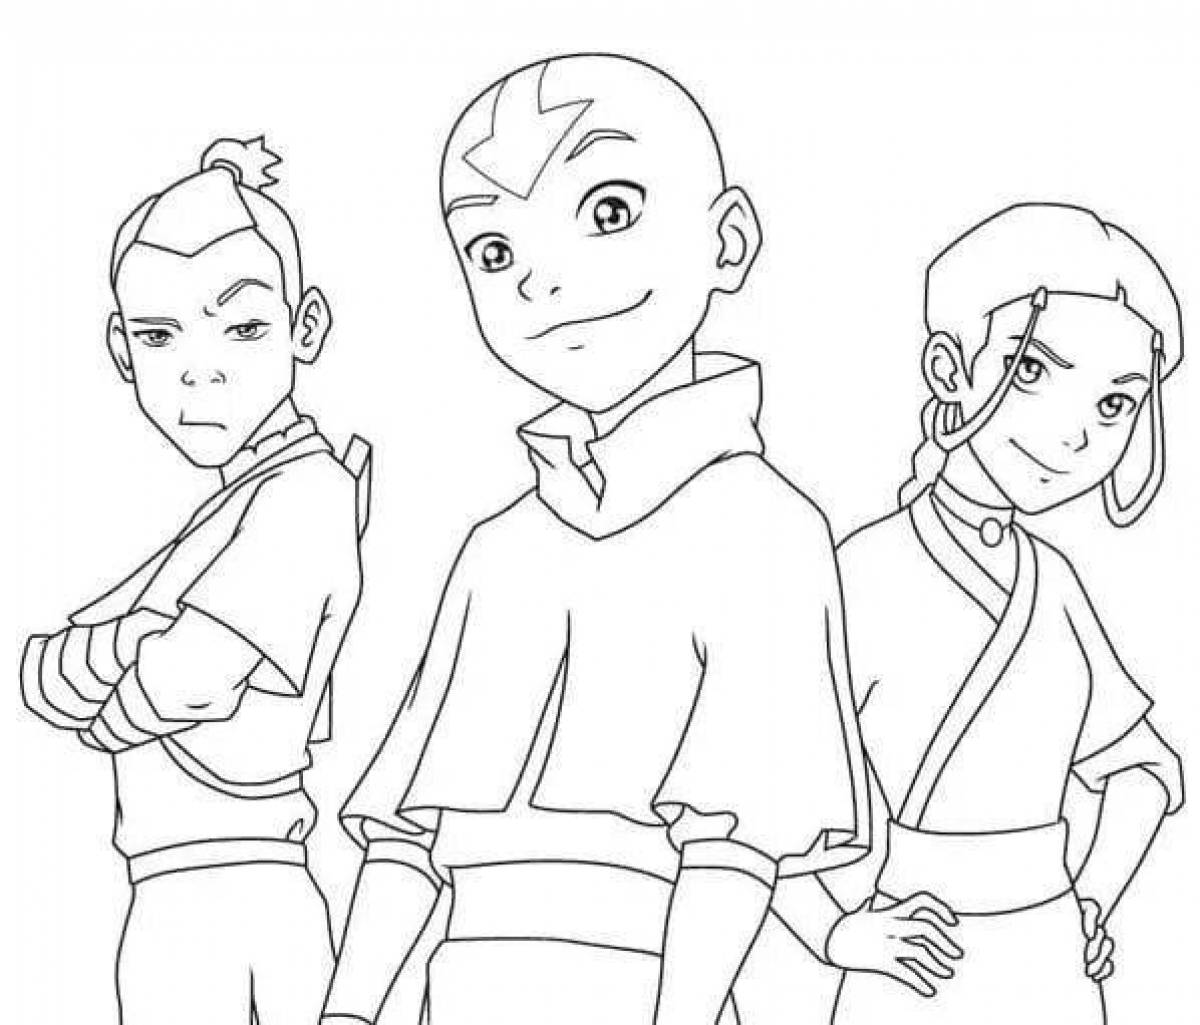 Outstanding avatar coloring page